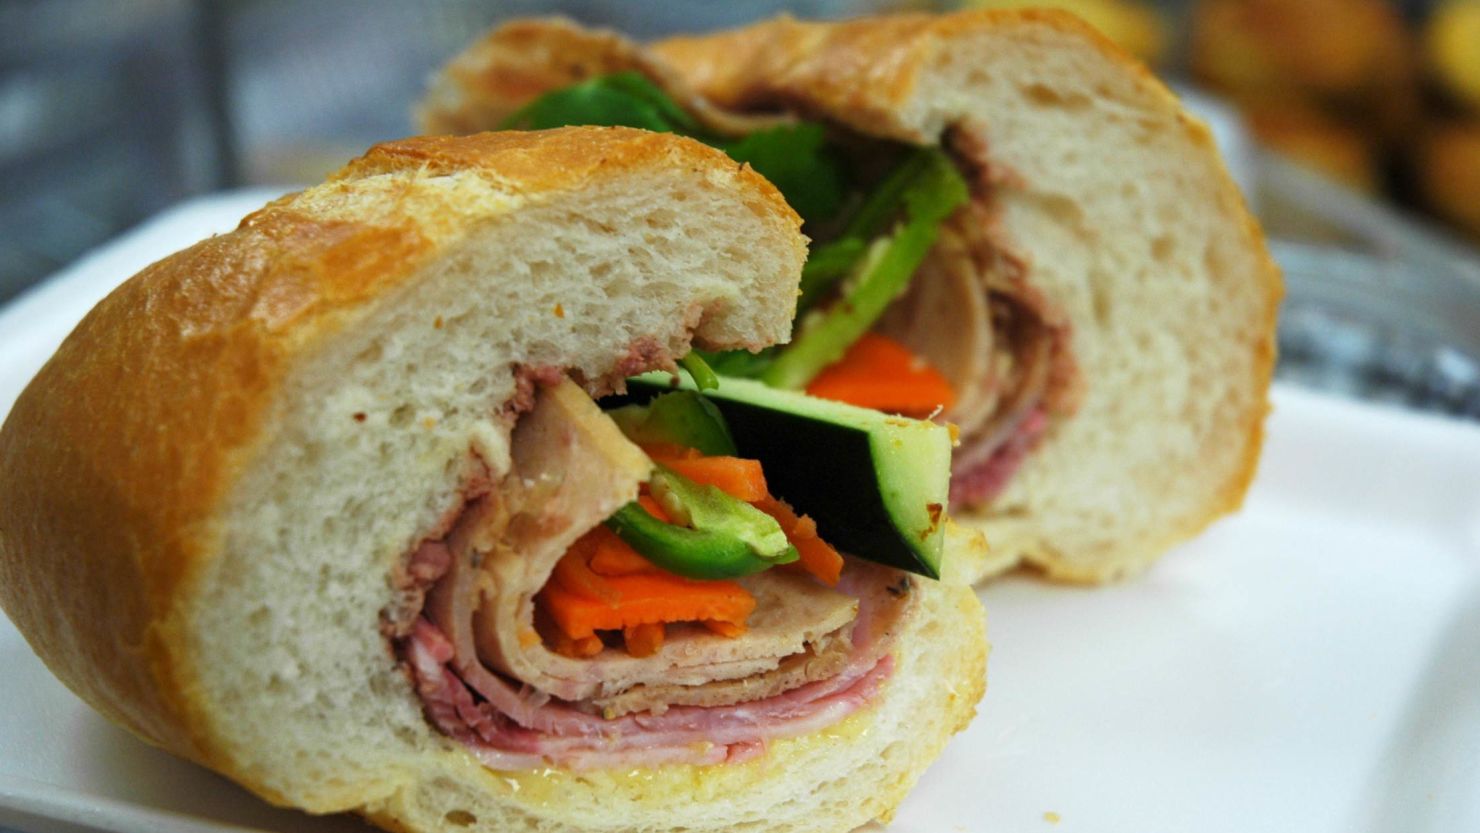 One could easily spend their entire New Orleans visit feasting on bread-wrapped delicacies. Pictured here is a banh mi from Dong Phuong Bakery.